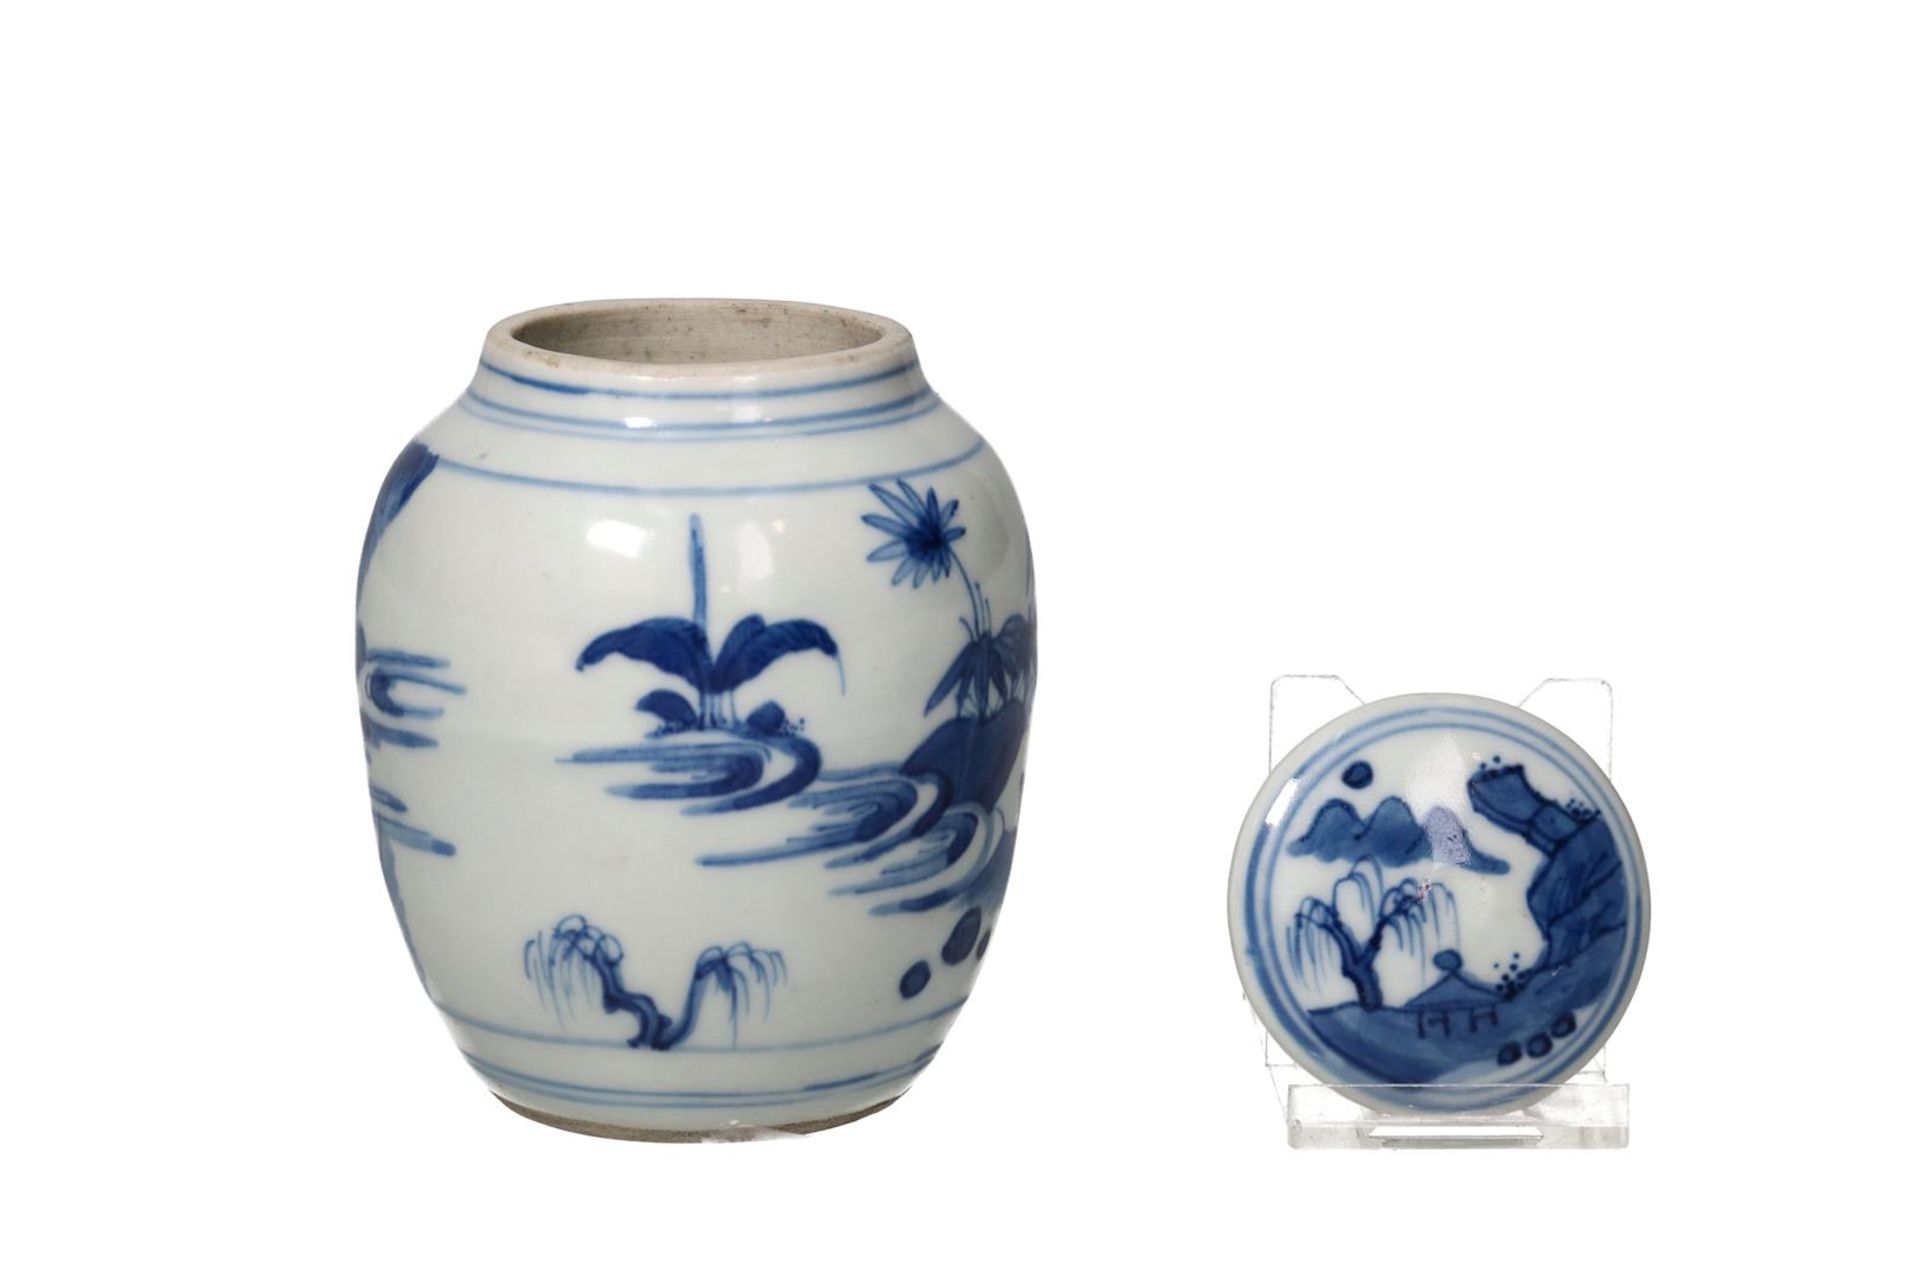 A blue and white porcelain jar with lid, decorated with a landscape with figures. Unmarked. China, - Image 3 of 6